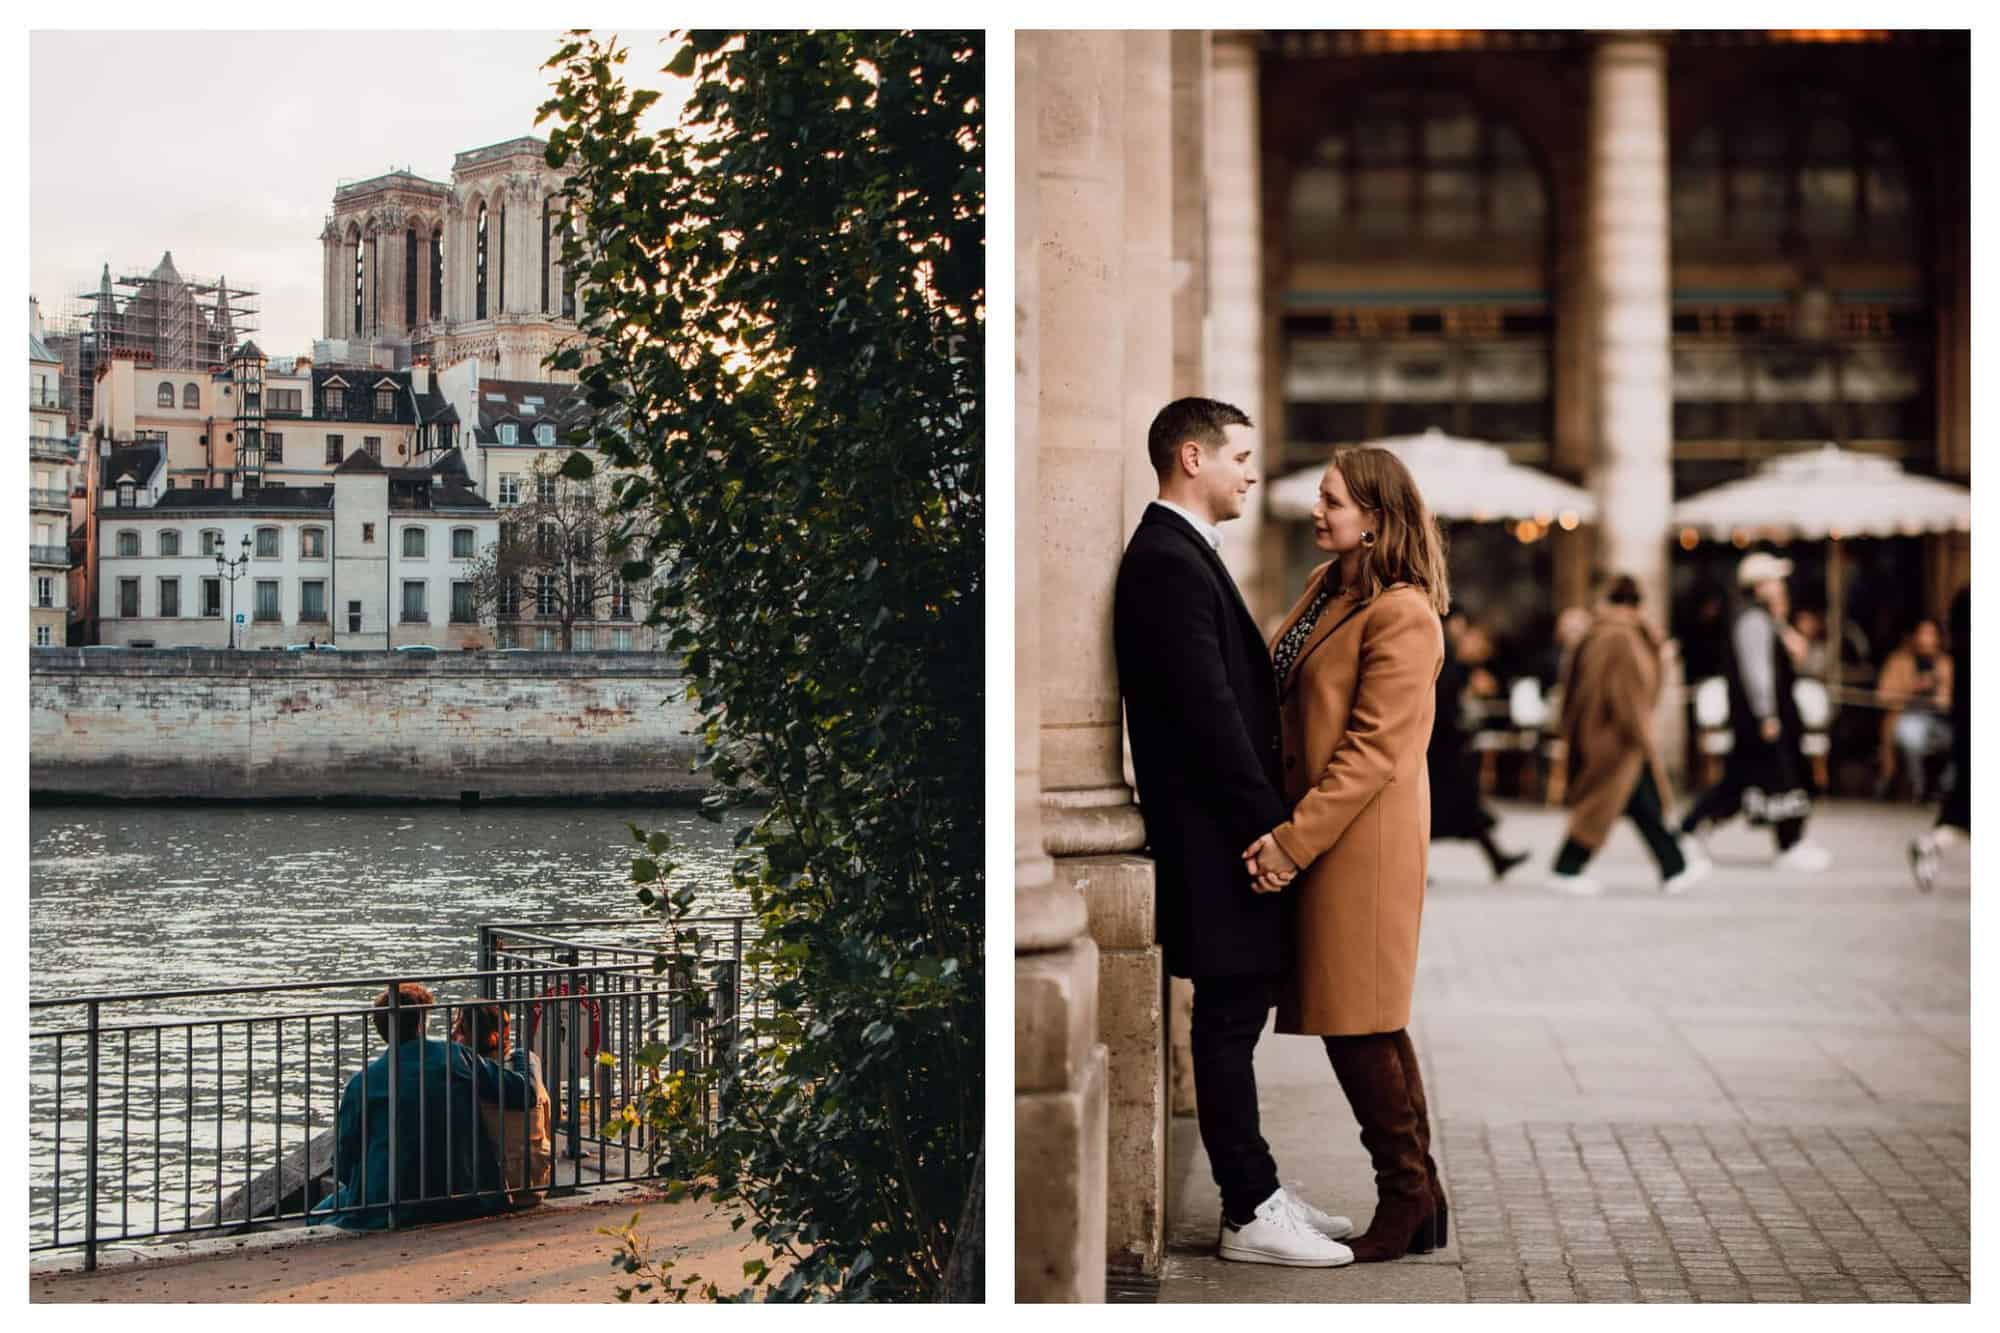 Left: A couple are sitting by the Seine river and looking at the Notre Dame. Right: A man in a black coat and a woman in a beige coat are looking at each other and holding hands.